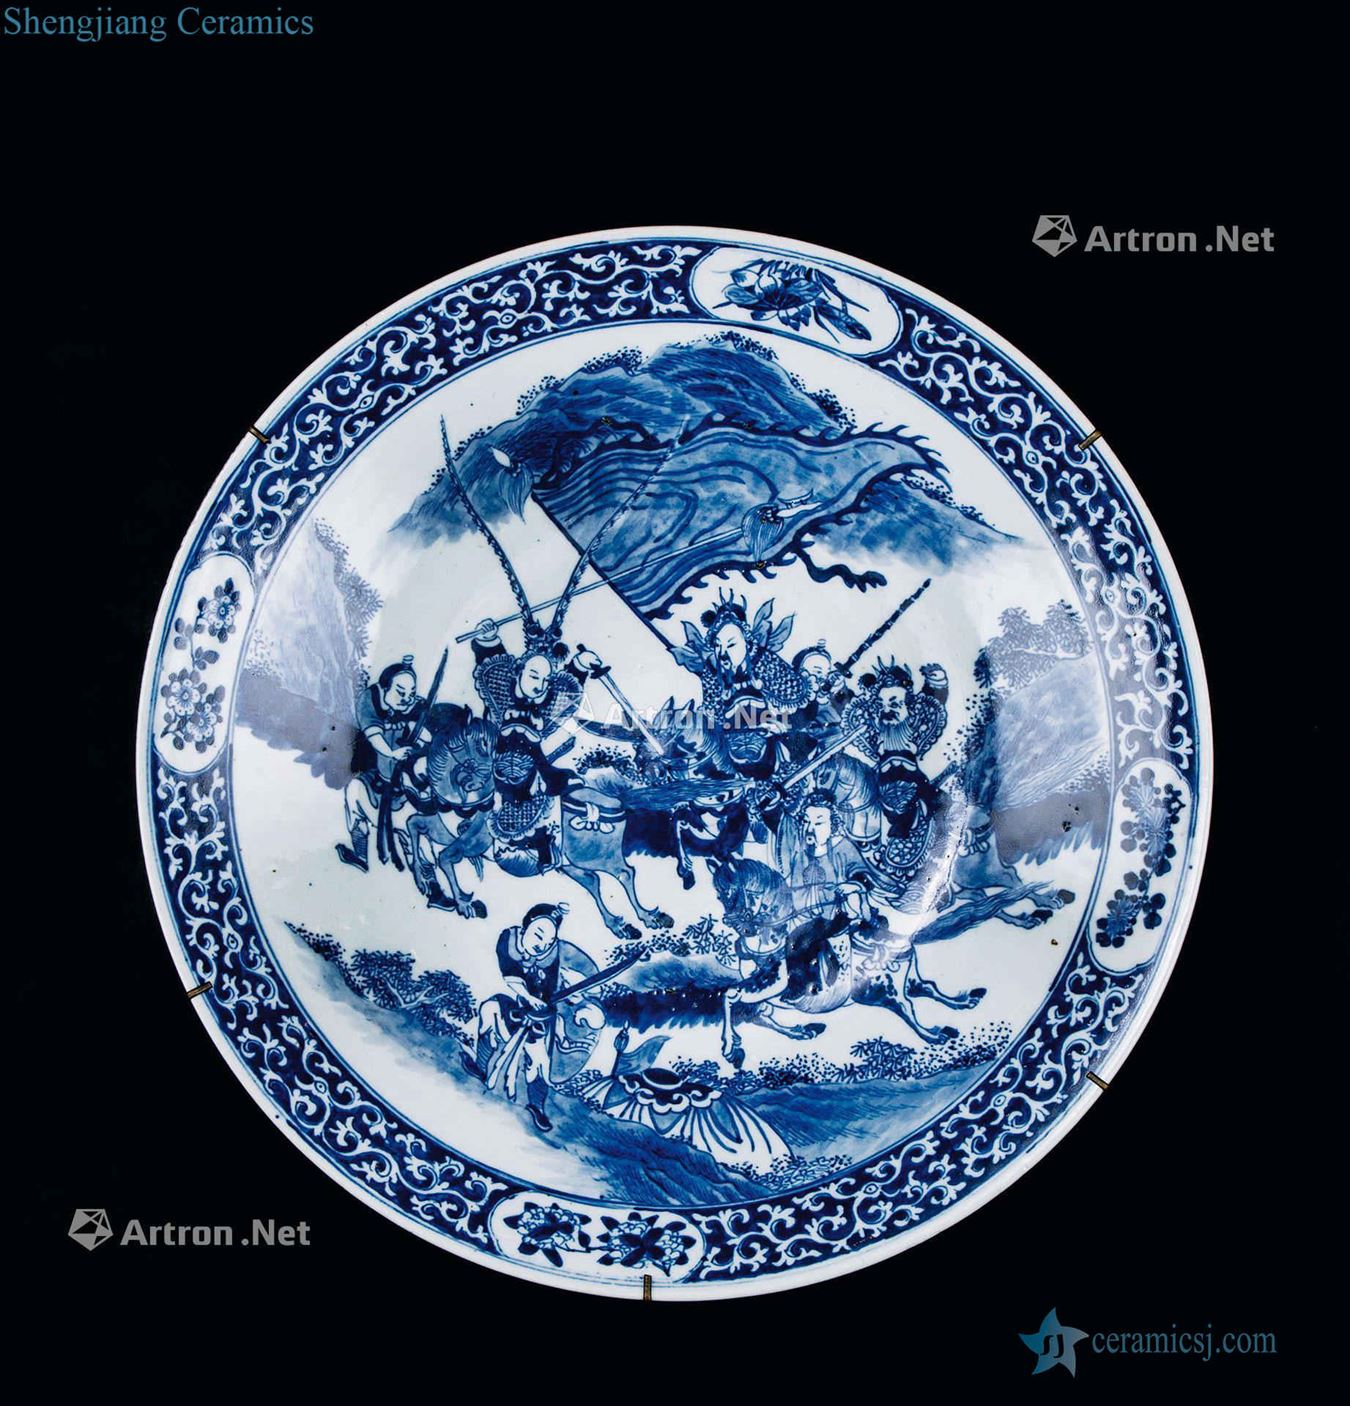 In the qing dynasty (1644-1911) blue and white characters story lines